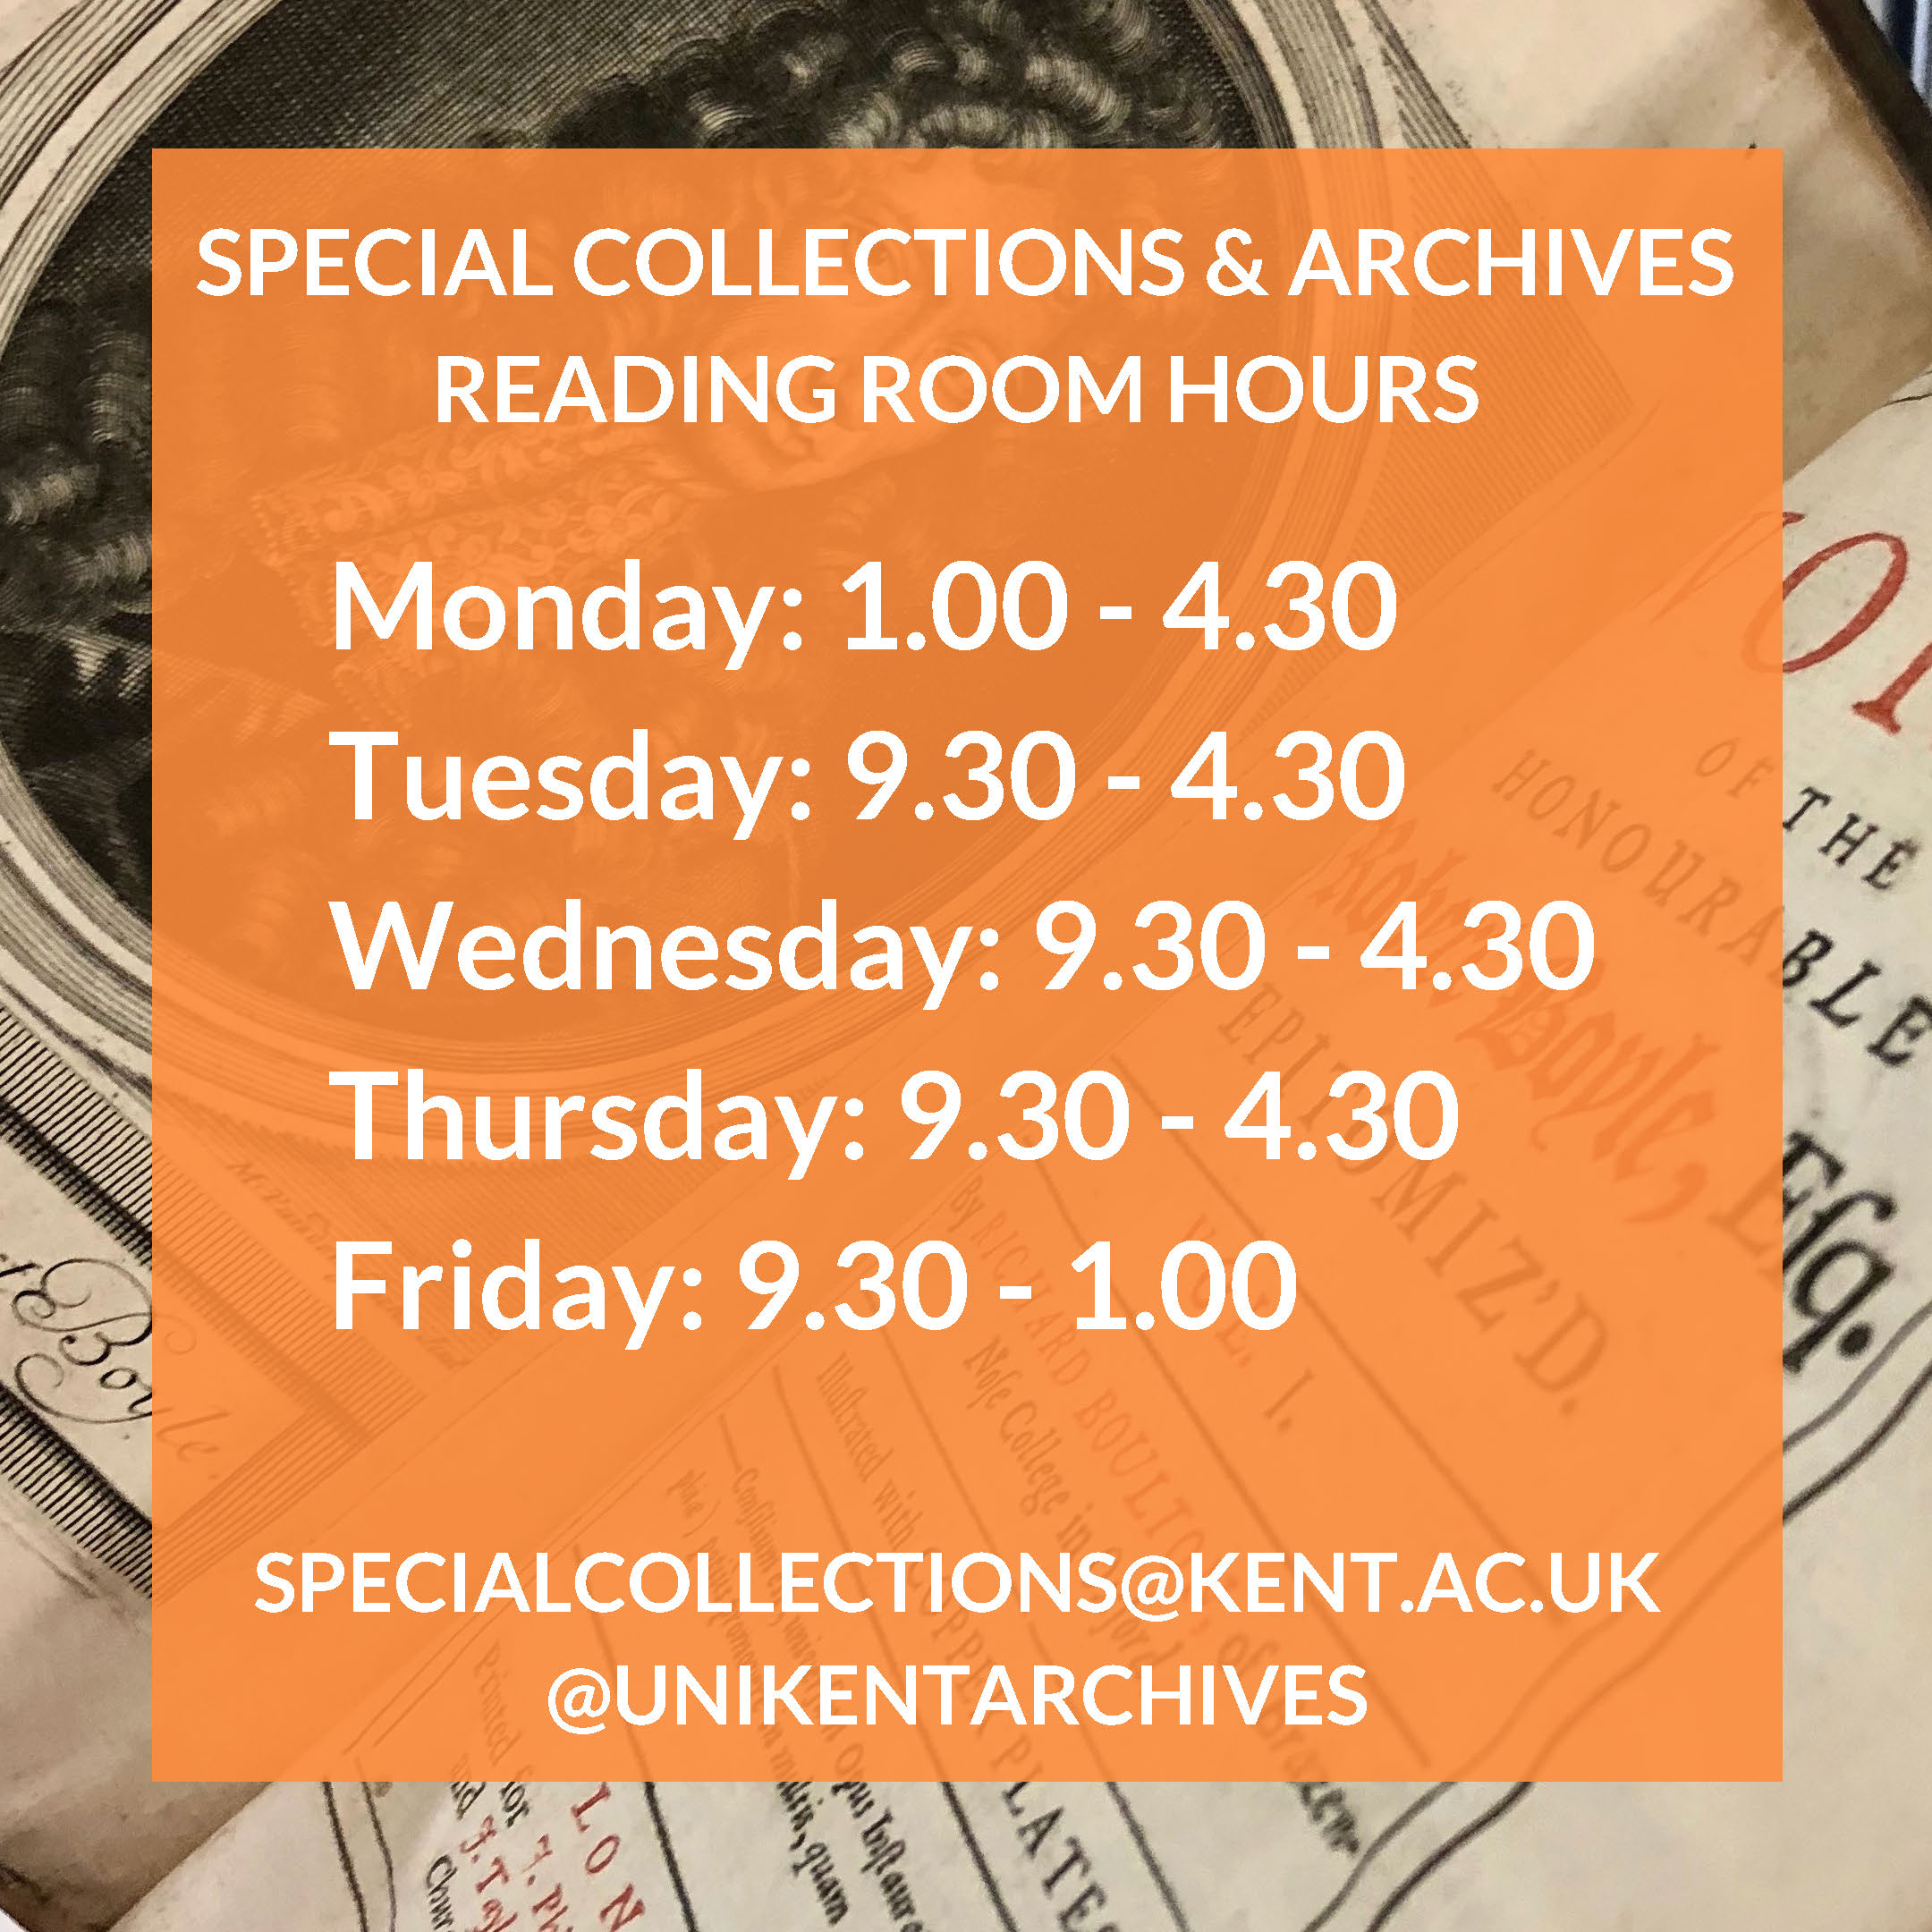 Graphic displaying details of the new opening hours for the Special Collections & Archives Reading Room, set against a background of a book from the Maddison Collection